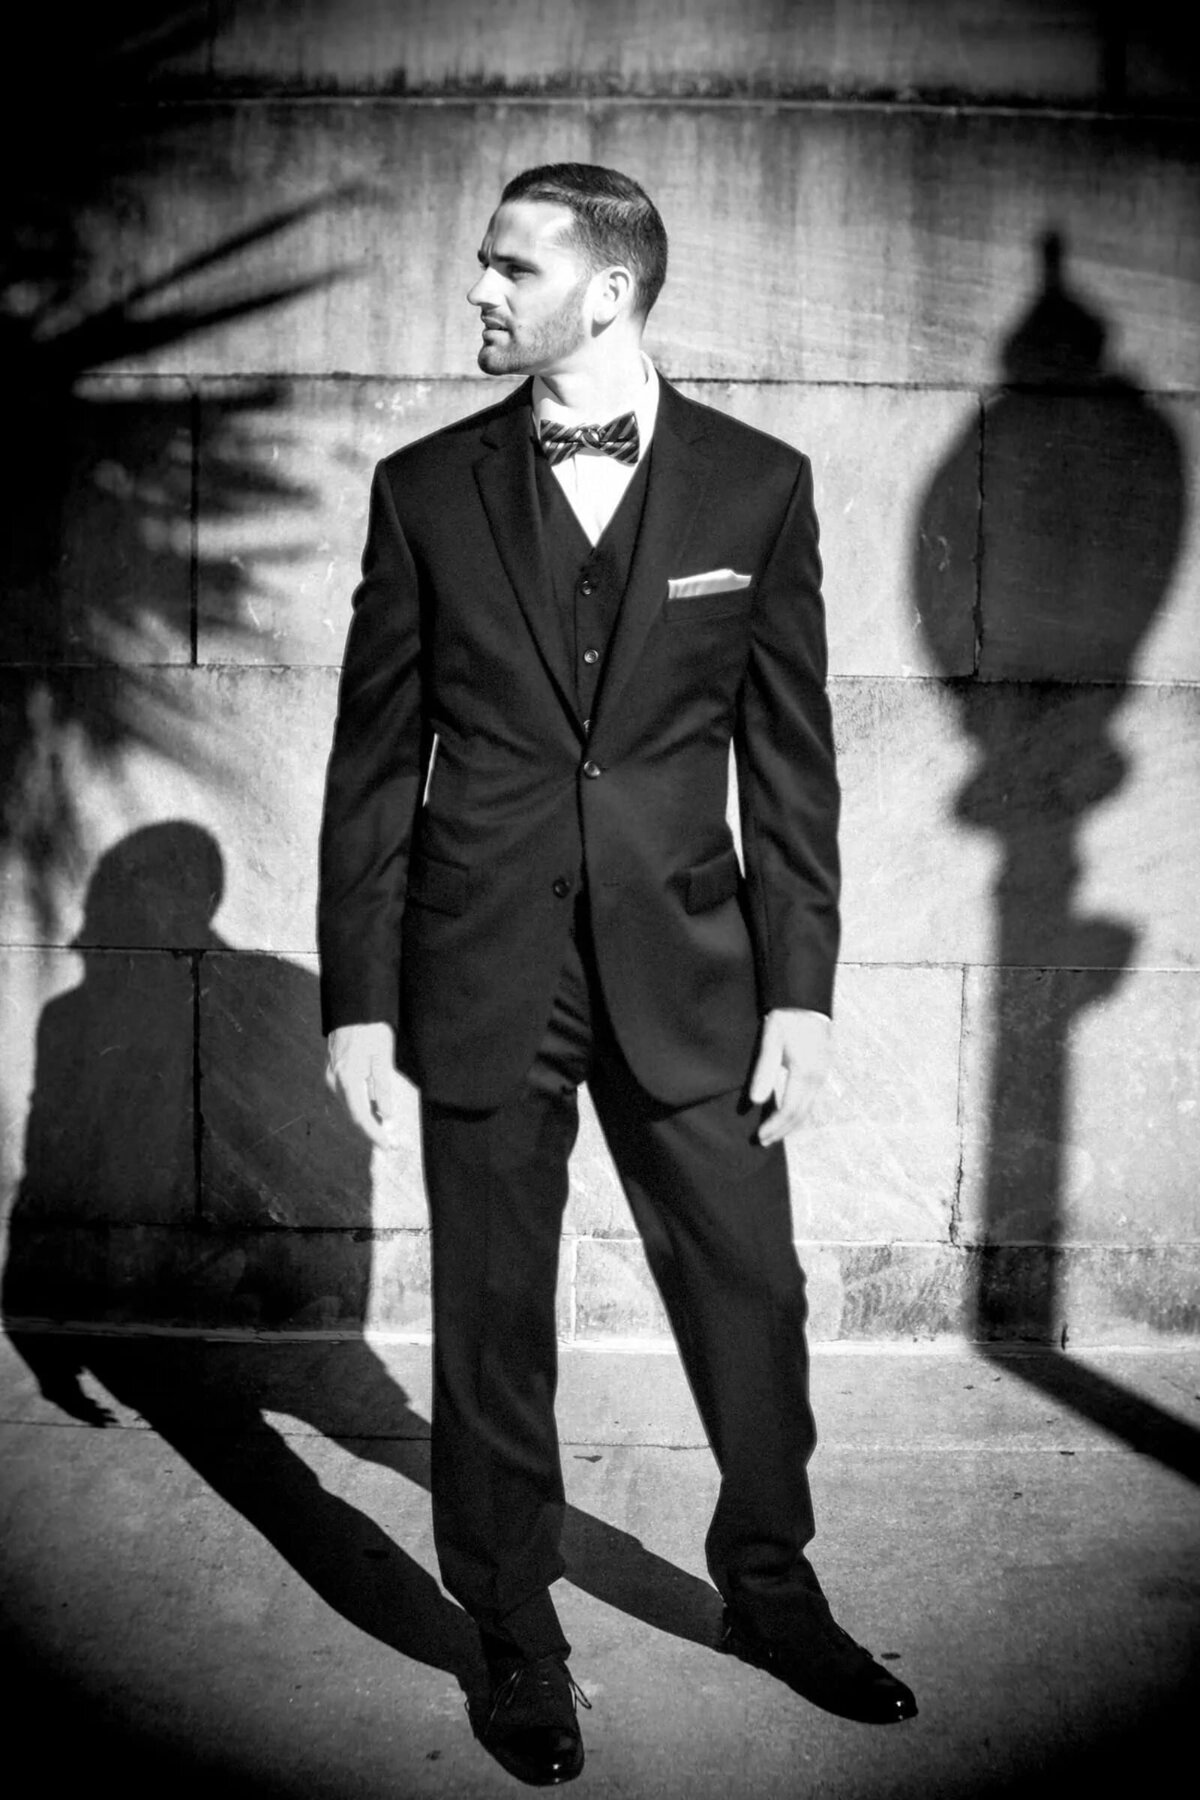 Black and white photo of a groom in formal attire, standing confidently with striking shadows casting patterns behind him